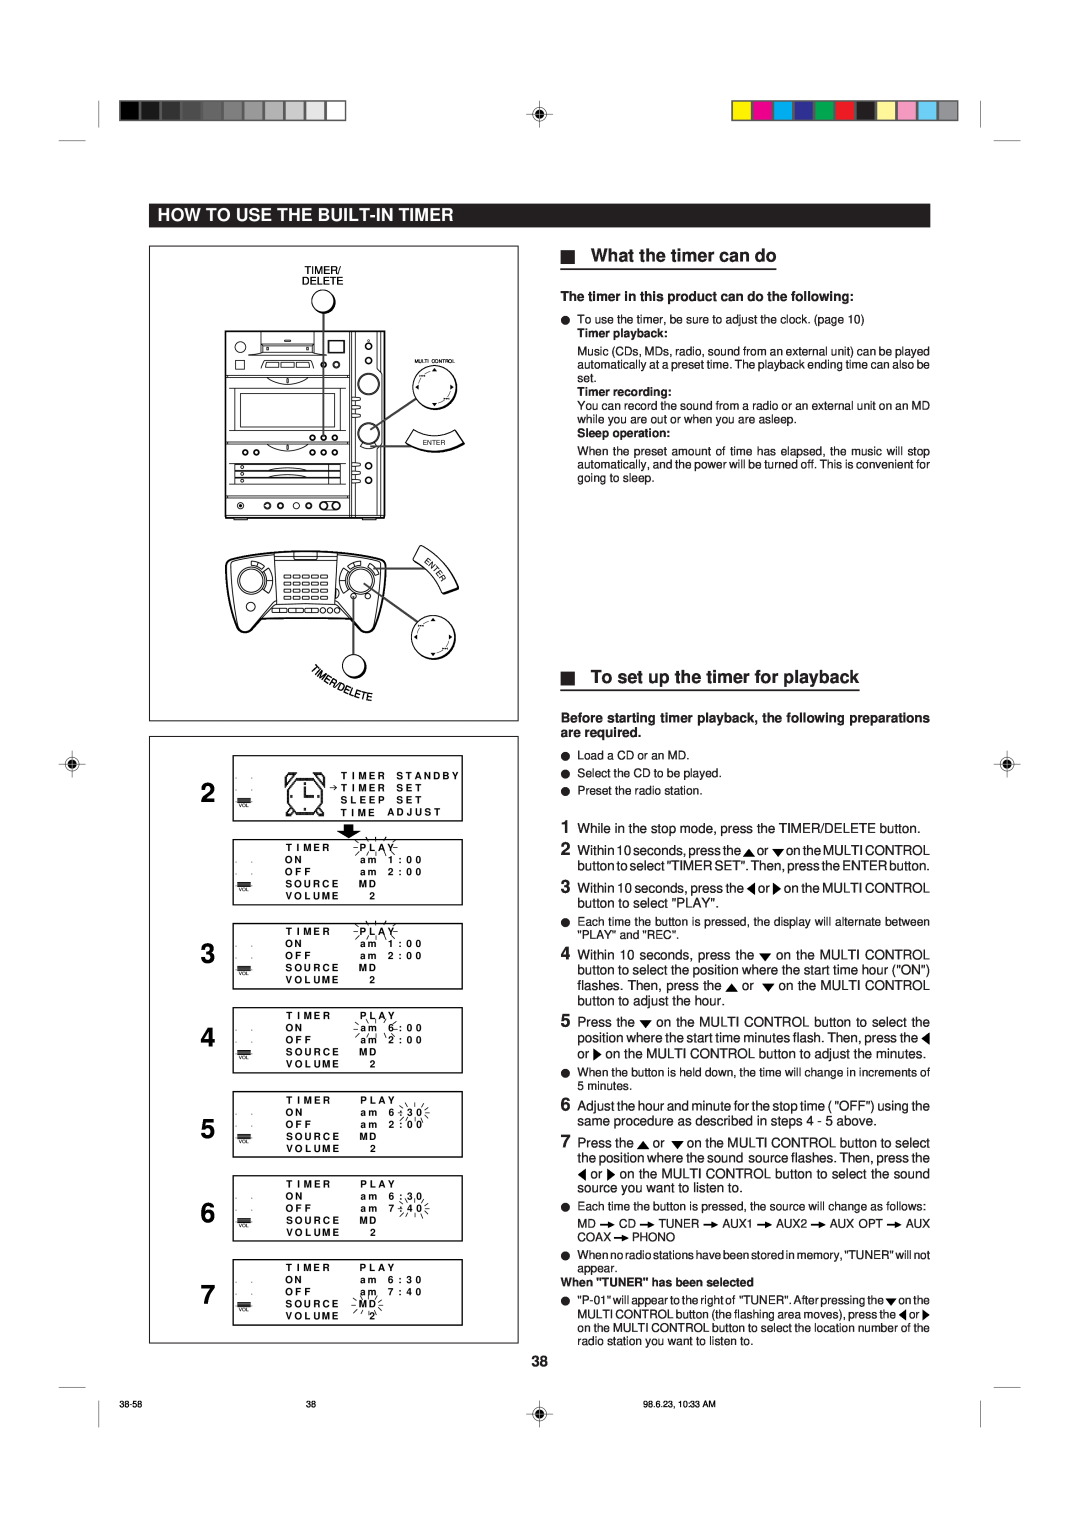 Sharp MD-X8 operation manual How To Use The Built-Intimer, HWhat the timer can do, HTo set up the timer for playback 